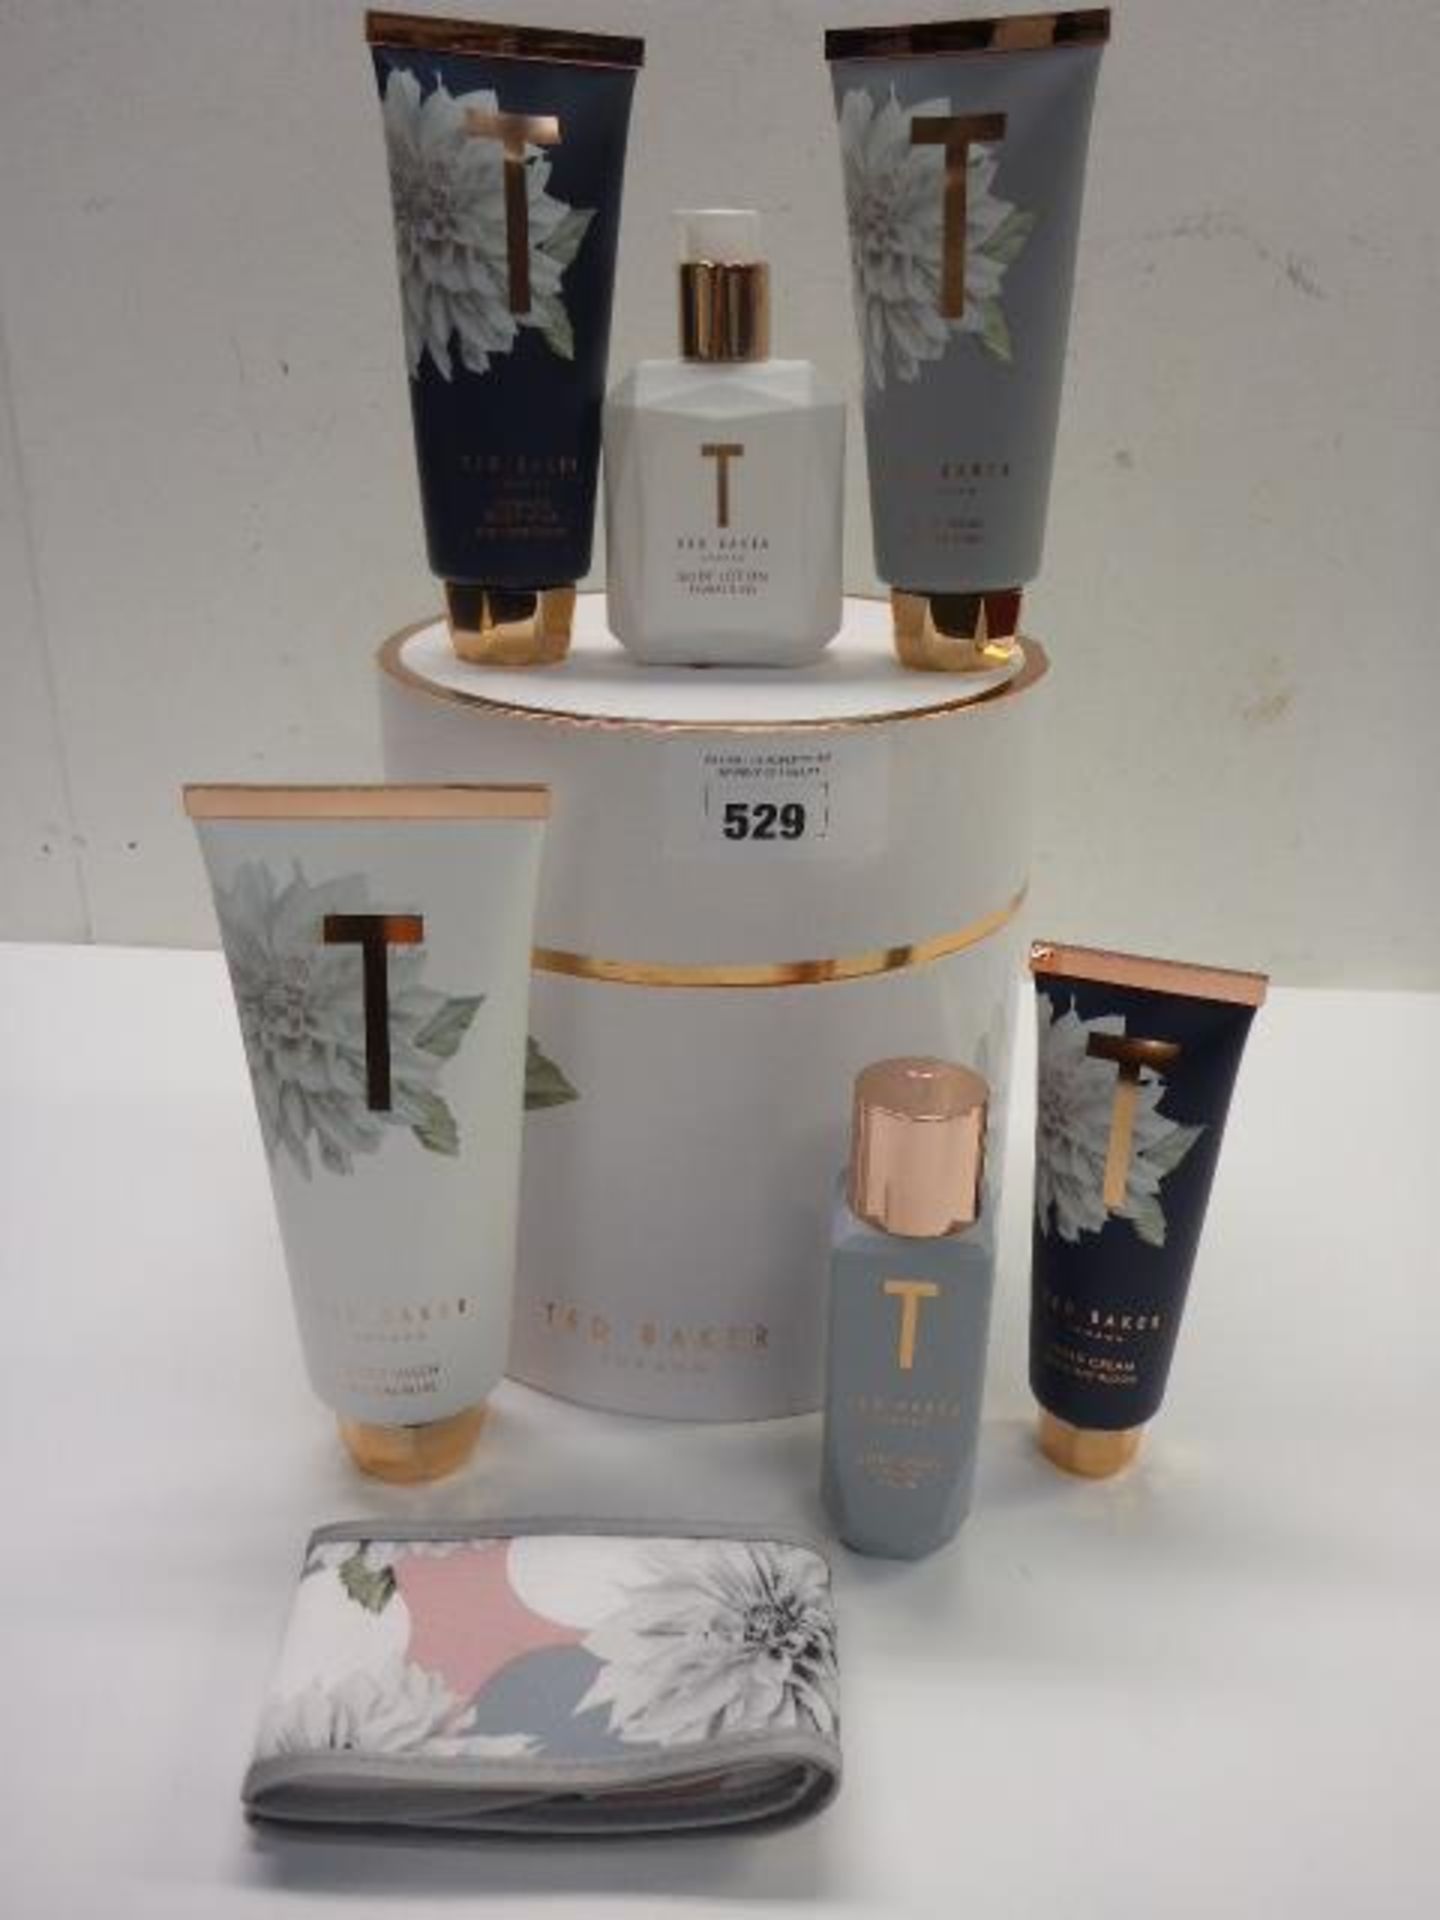 Ted Baker toiletry gift box set